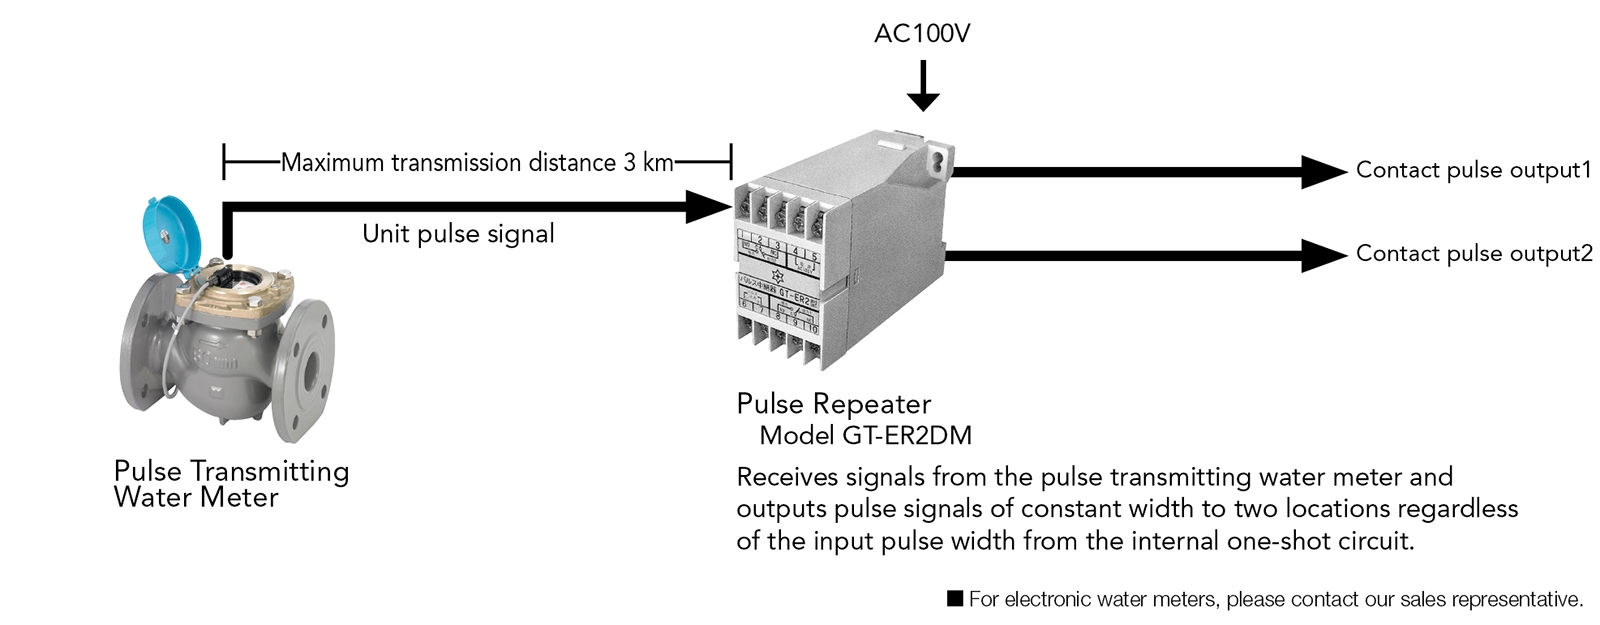 I want to extend the transmission distance of a pulse signal / I want to transmit a pulse signal to two locations.